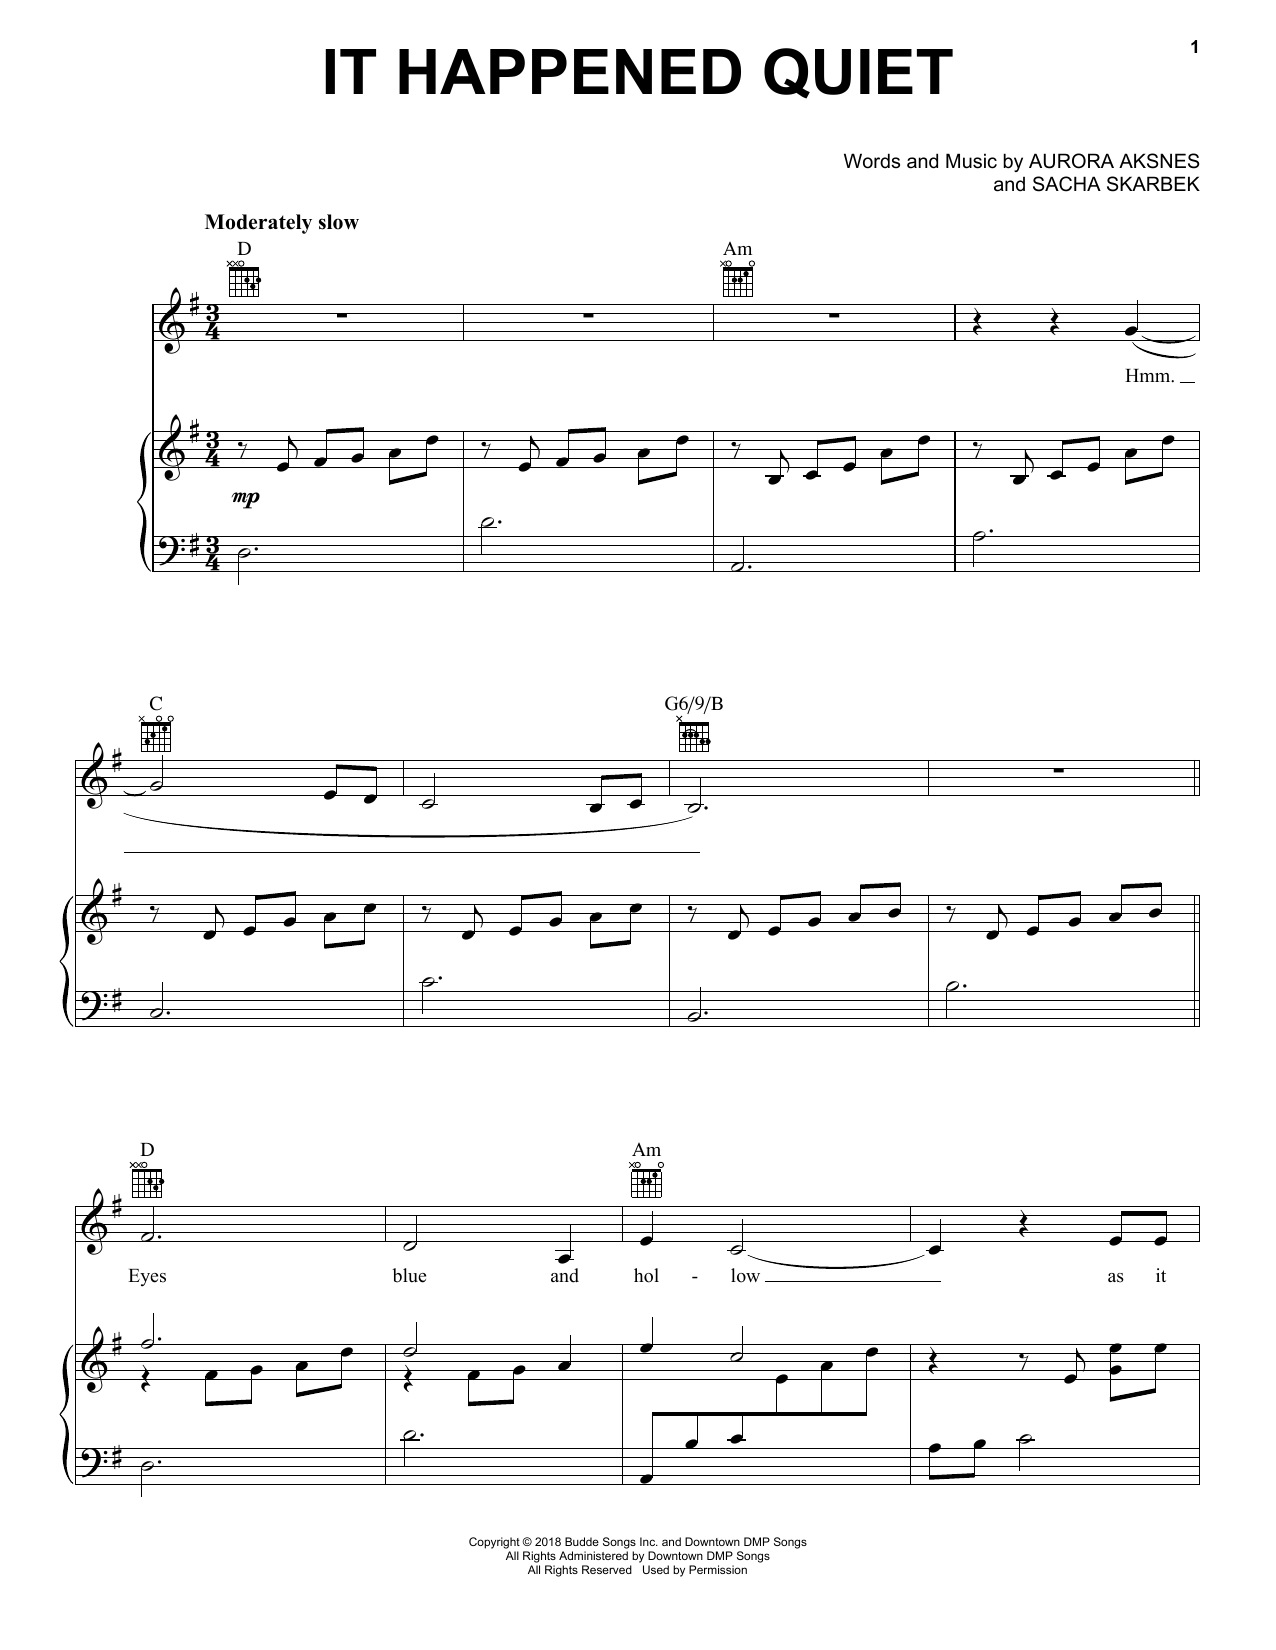 Aurora It Happened Quiet sheet music notes and chords. Download Printable PDF.